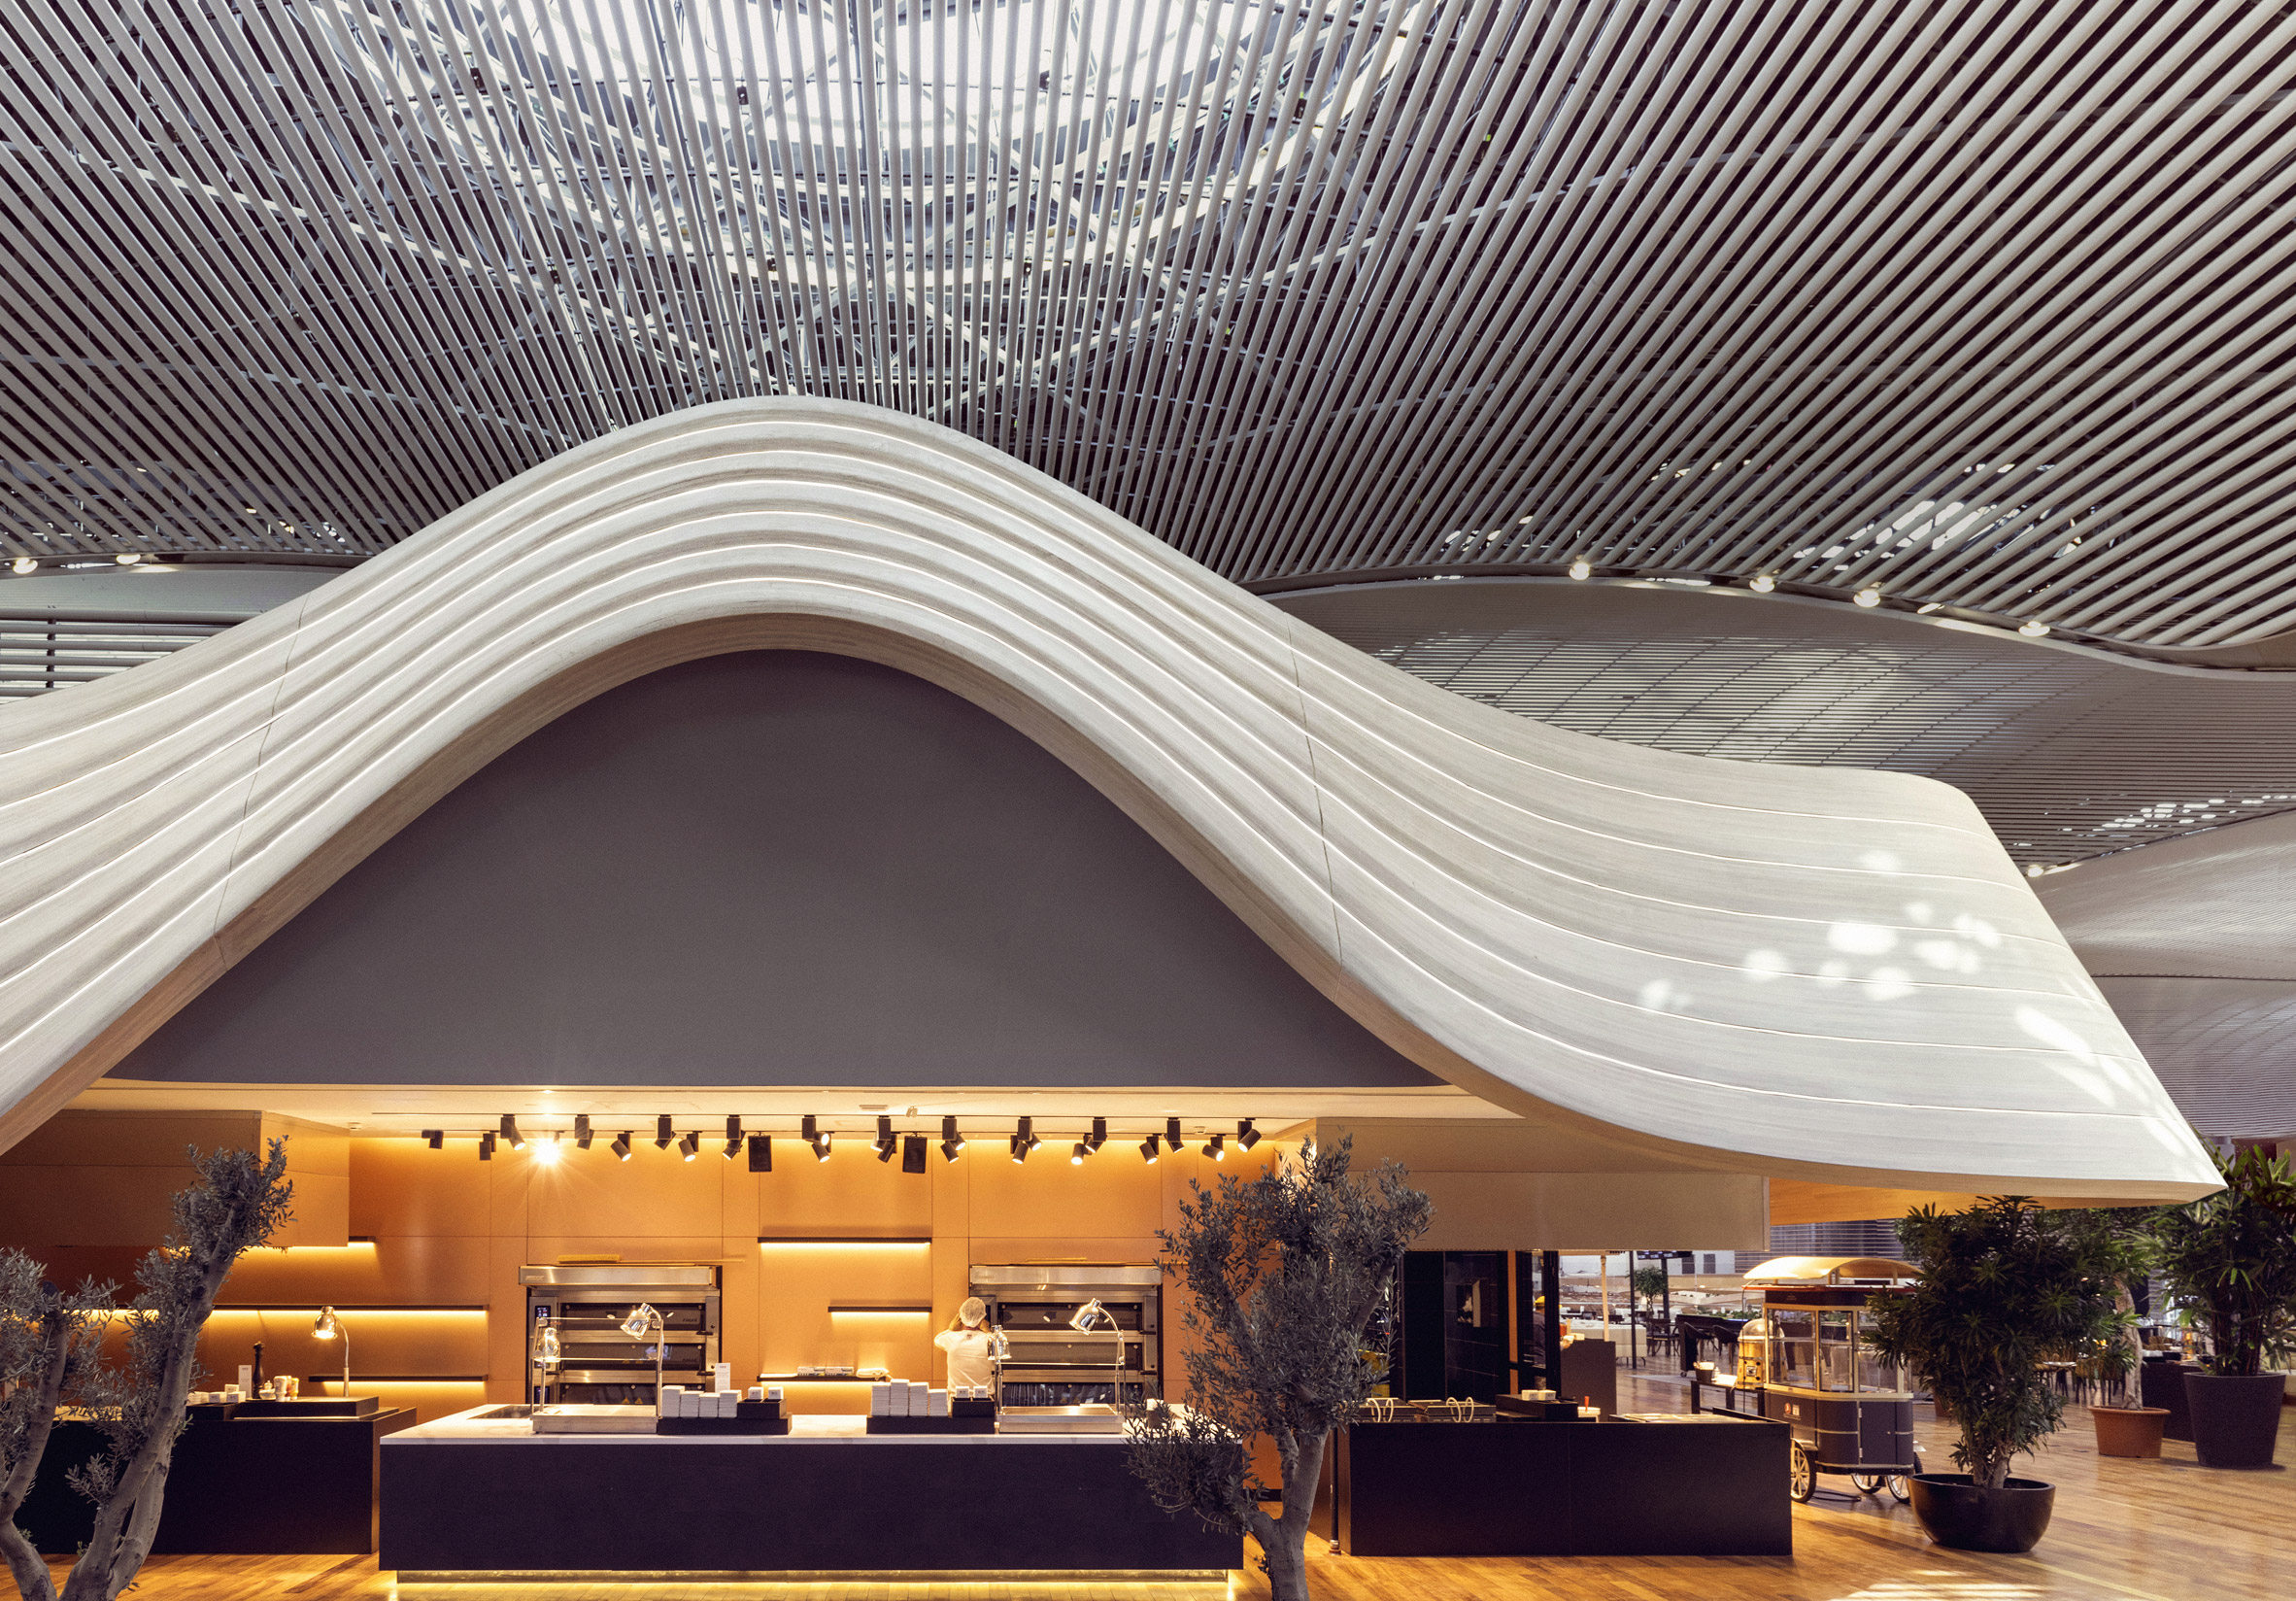 Flow Wall in Istanbul Airport designed by Softroom using parametrics